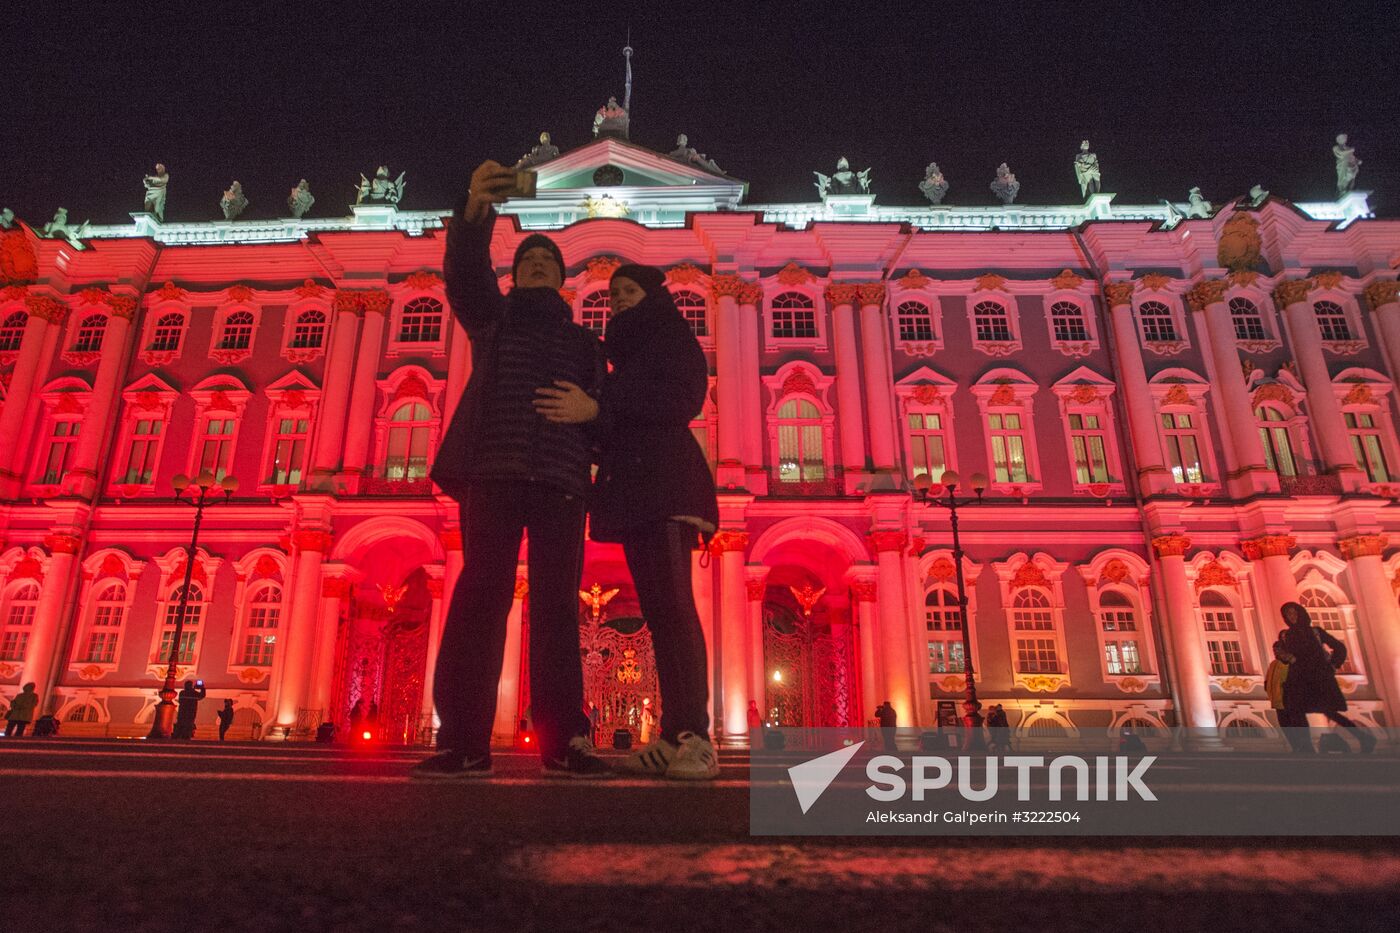 Storming of Winter Palace light show in St. Petersburg